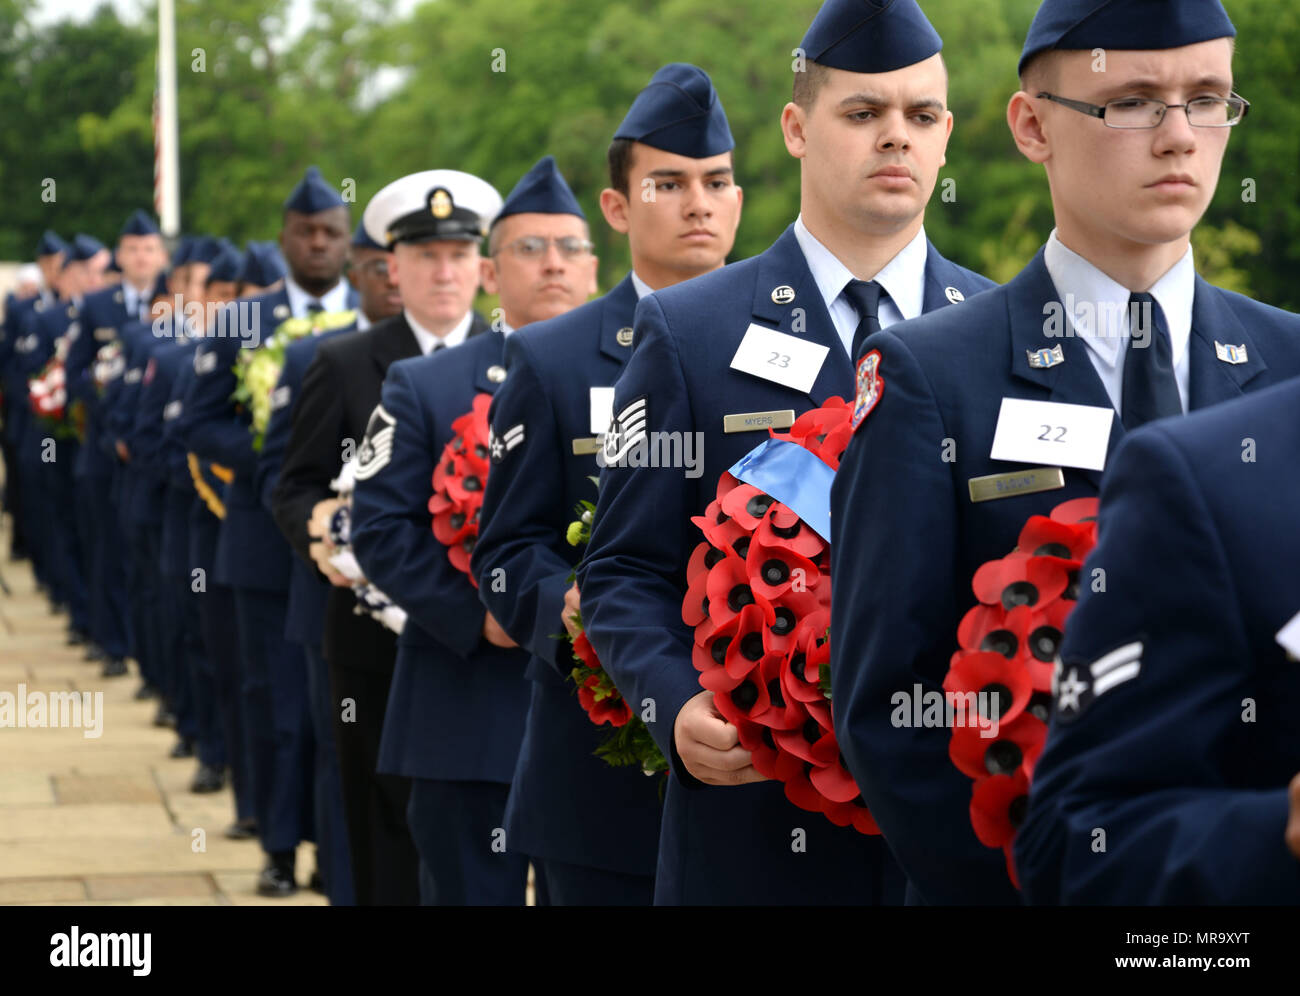 Dozens of Airmen and other U.S. Military Service members carry wreaths donated from several organizations to lay during the Madingley Memorial Day Ceremony May 29, 2017, at Madingley Memorial Cemetery in Cambridge, England. This year volunteers’ collected more than 4,000 portraits of veterans to lay at corresponding headstones within the cemetery. (U.S. Air Force photo by Senior Airman Christine Groening) Stock Photo